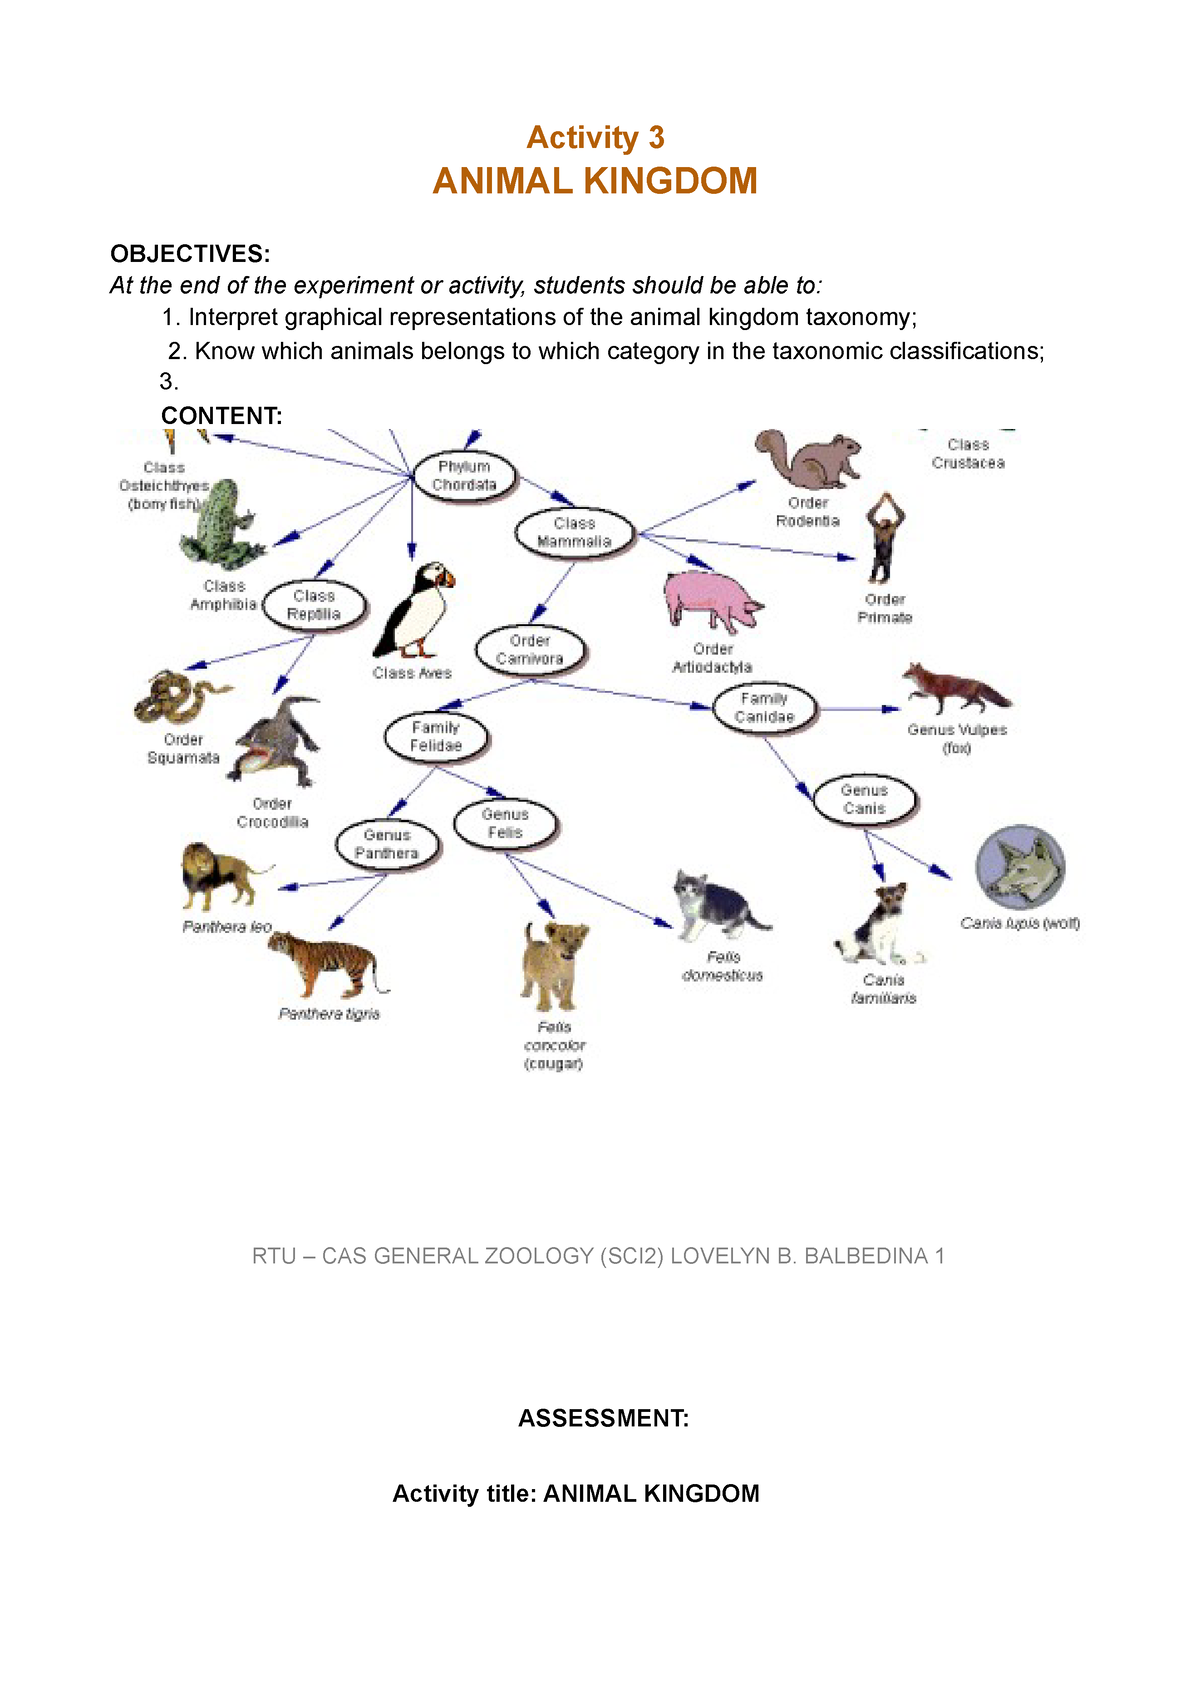 Lecture-Activity-3 Animal-Kingdom-1 module 1 - Activity 3 ANIMAL KINGDOM  OBJECTIVES: At the end of - Studocu